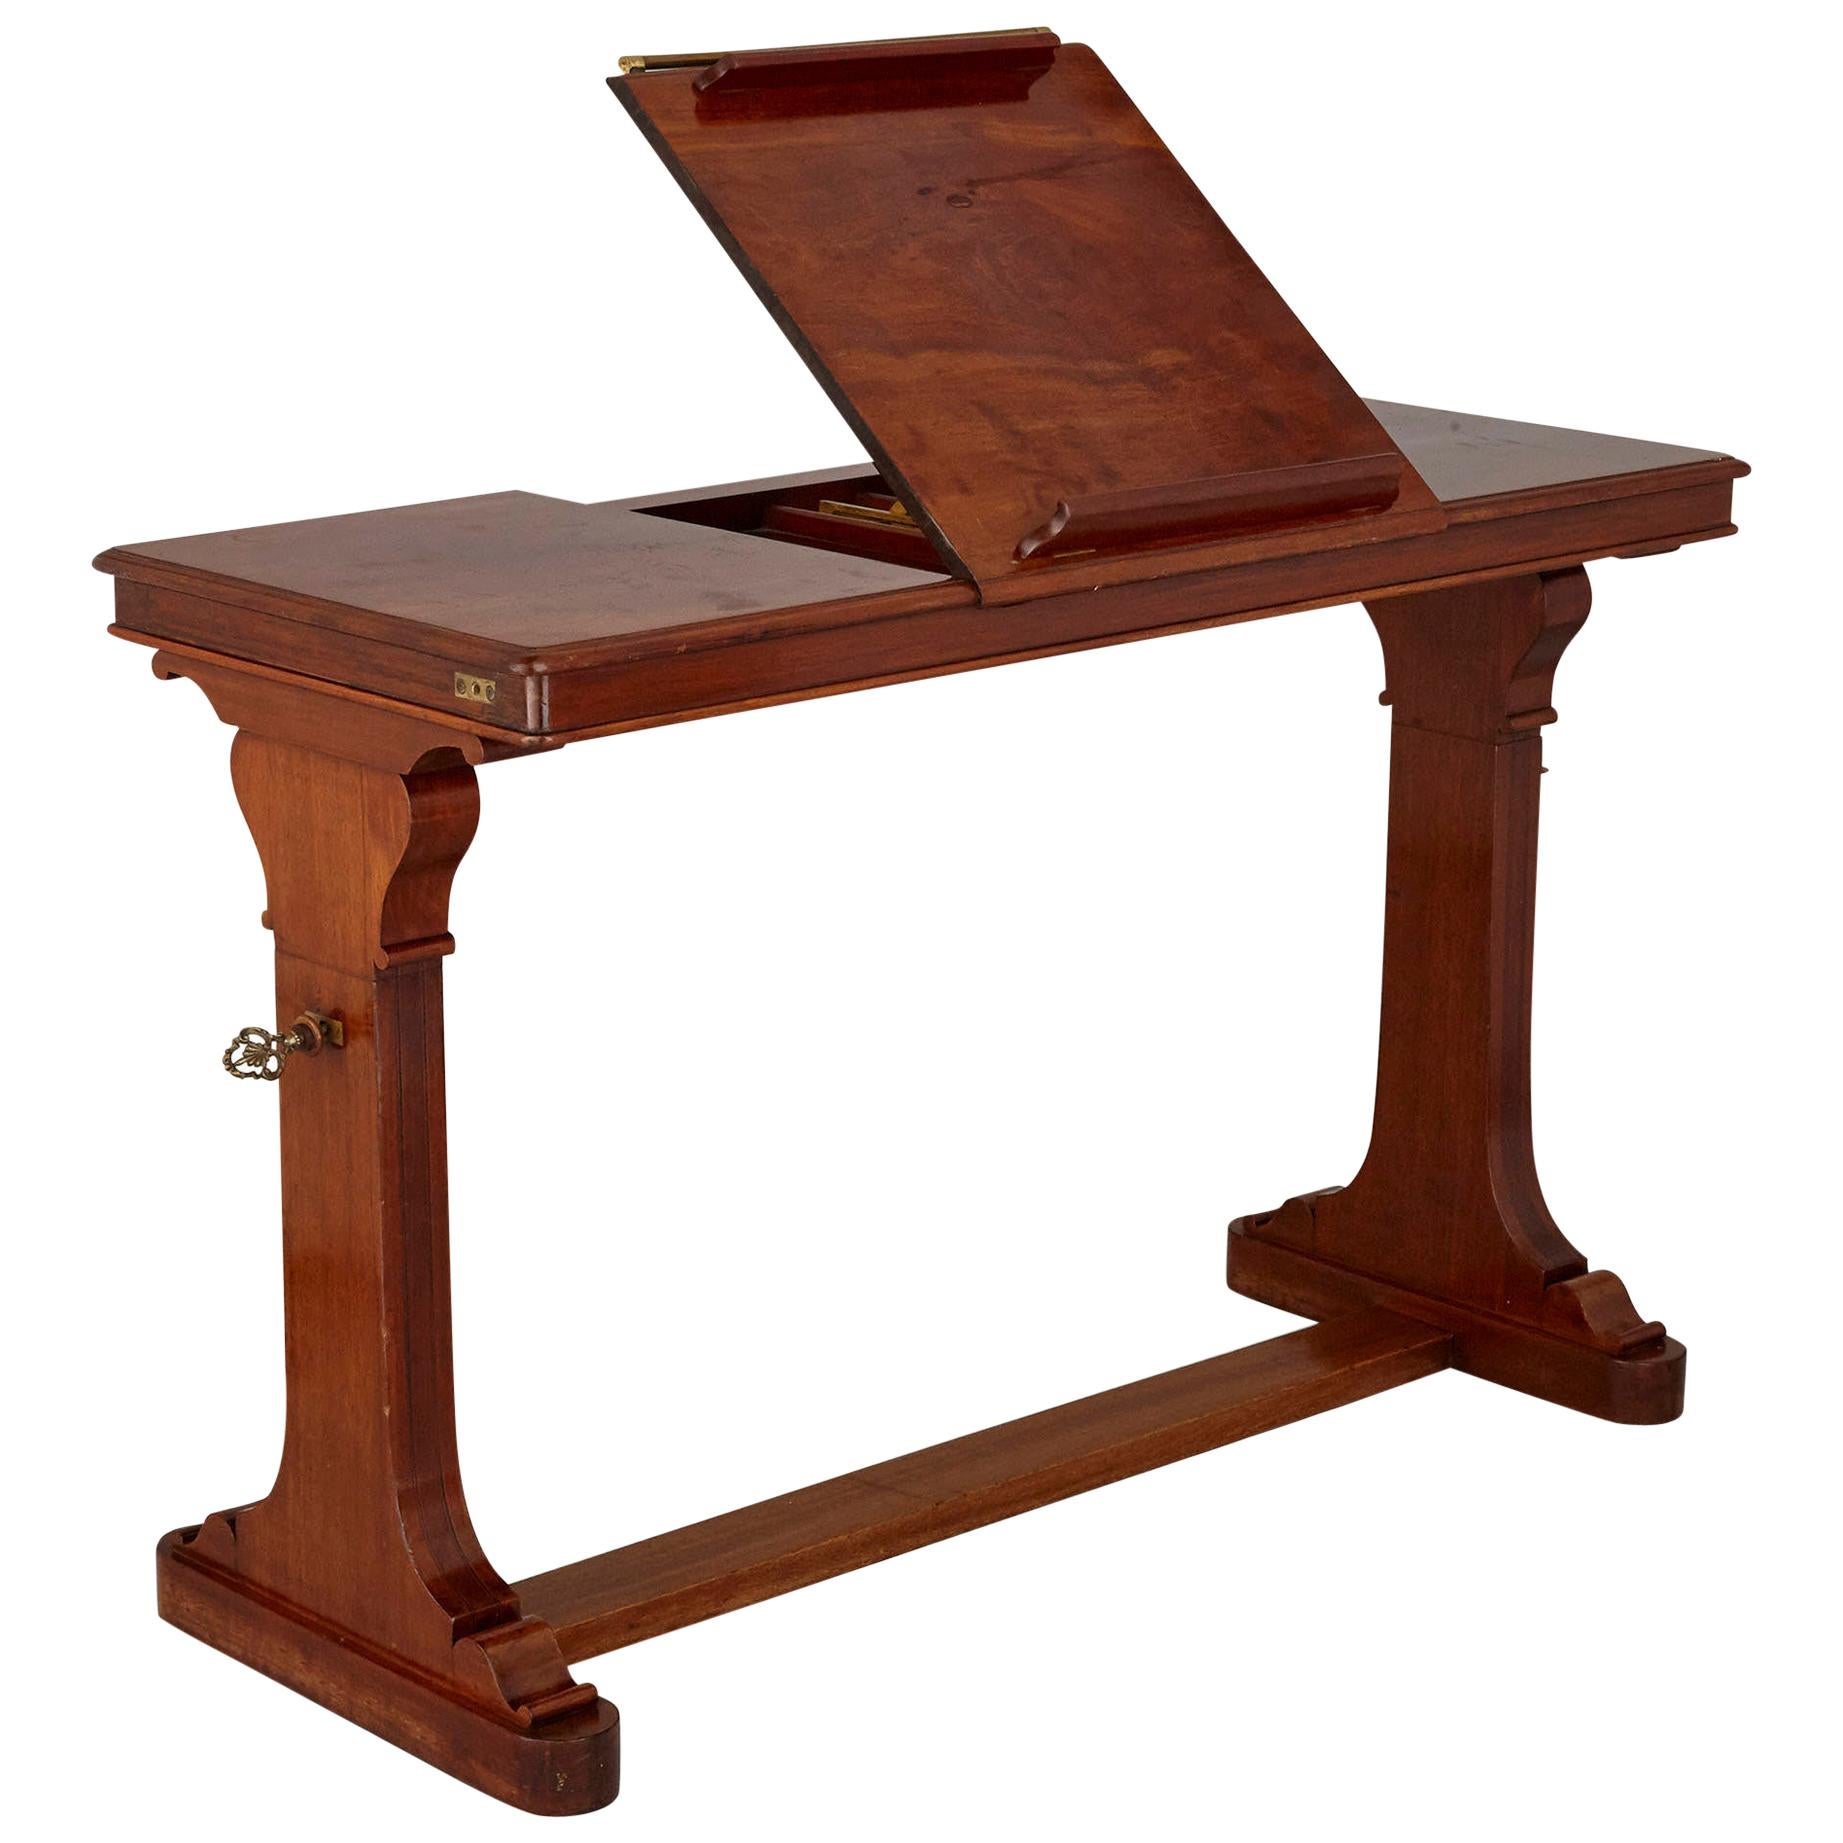 Antique English Wooden Desk with Reading Stand